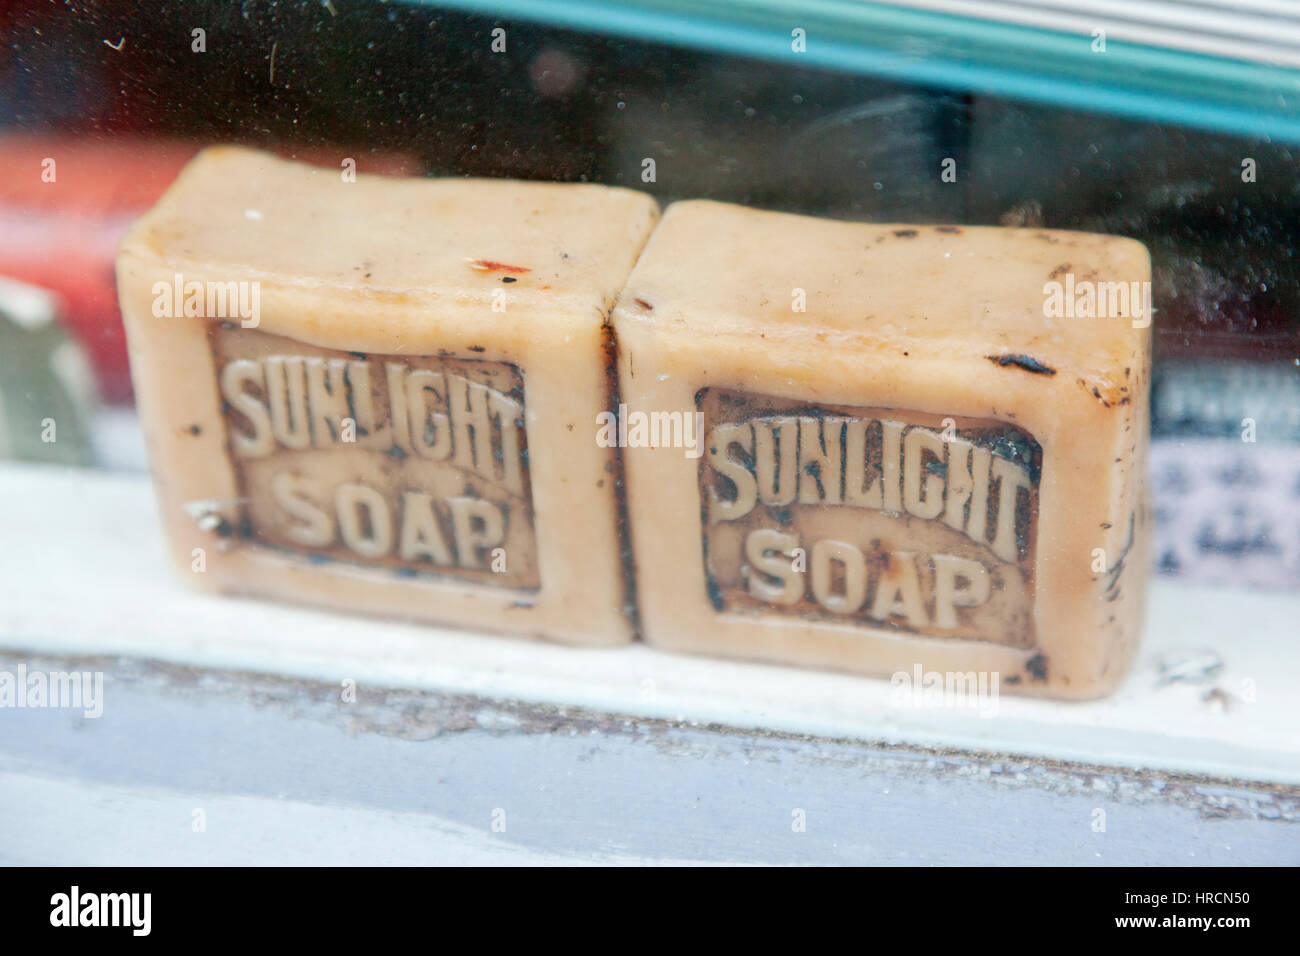 Two bars of Sunlight Soap Stock Photo - Alamy